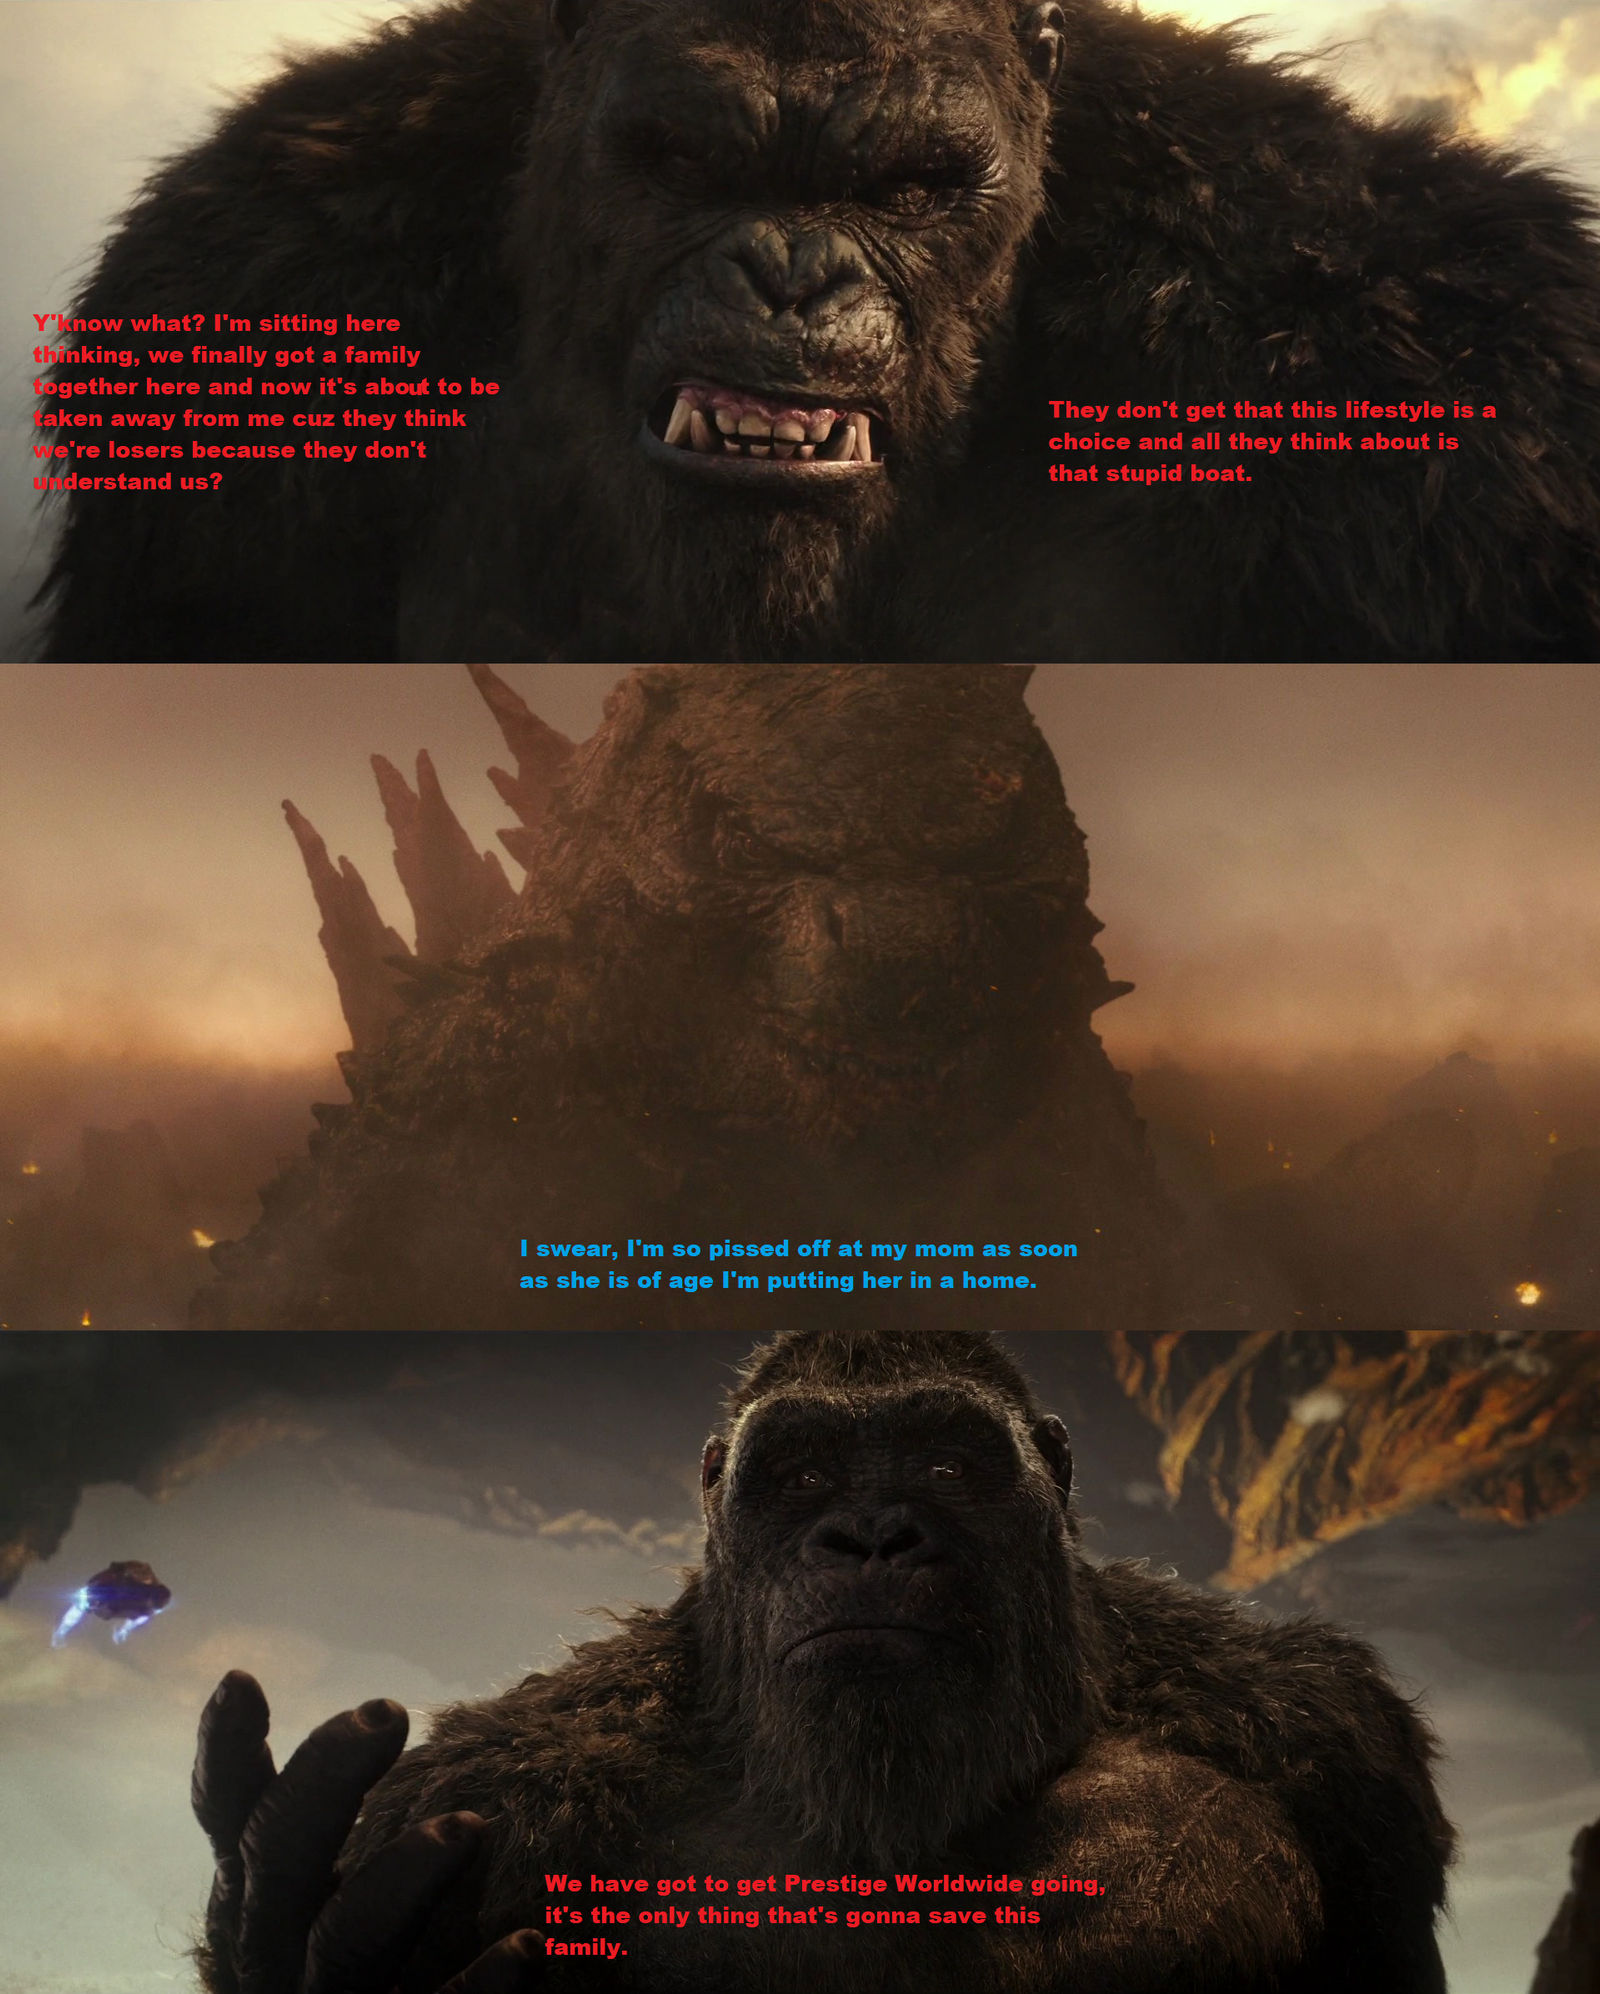 Godzilla and Kong Are Losers by MnstrFrc on DeviantArt